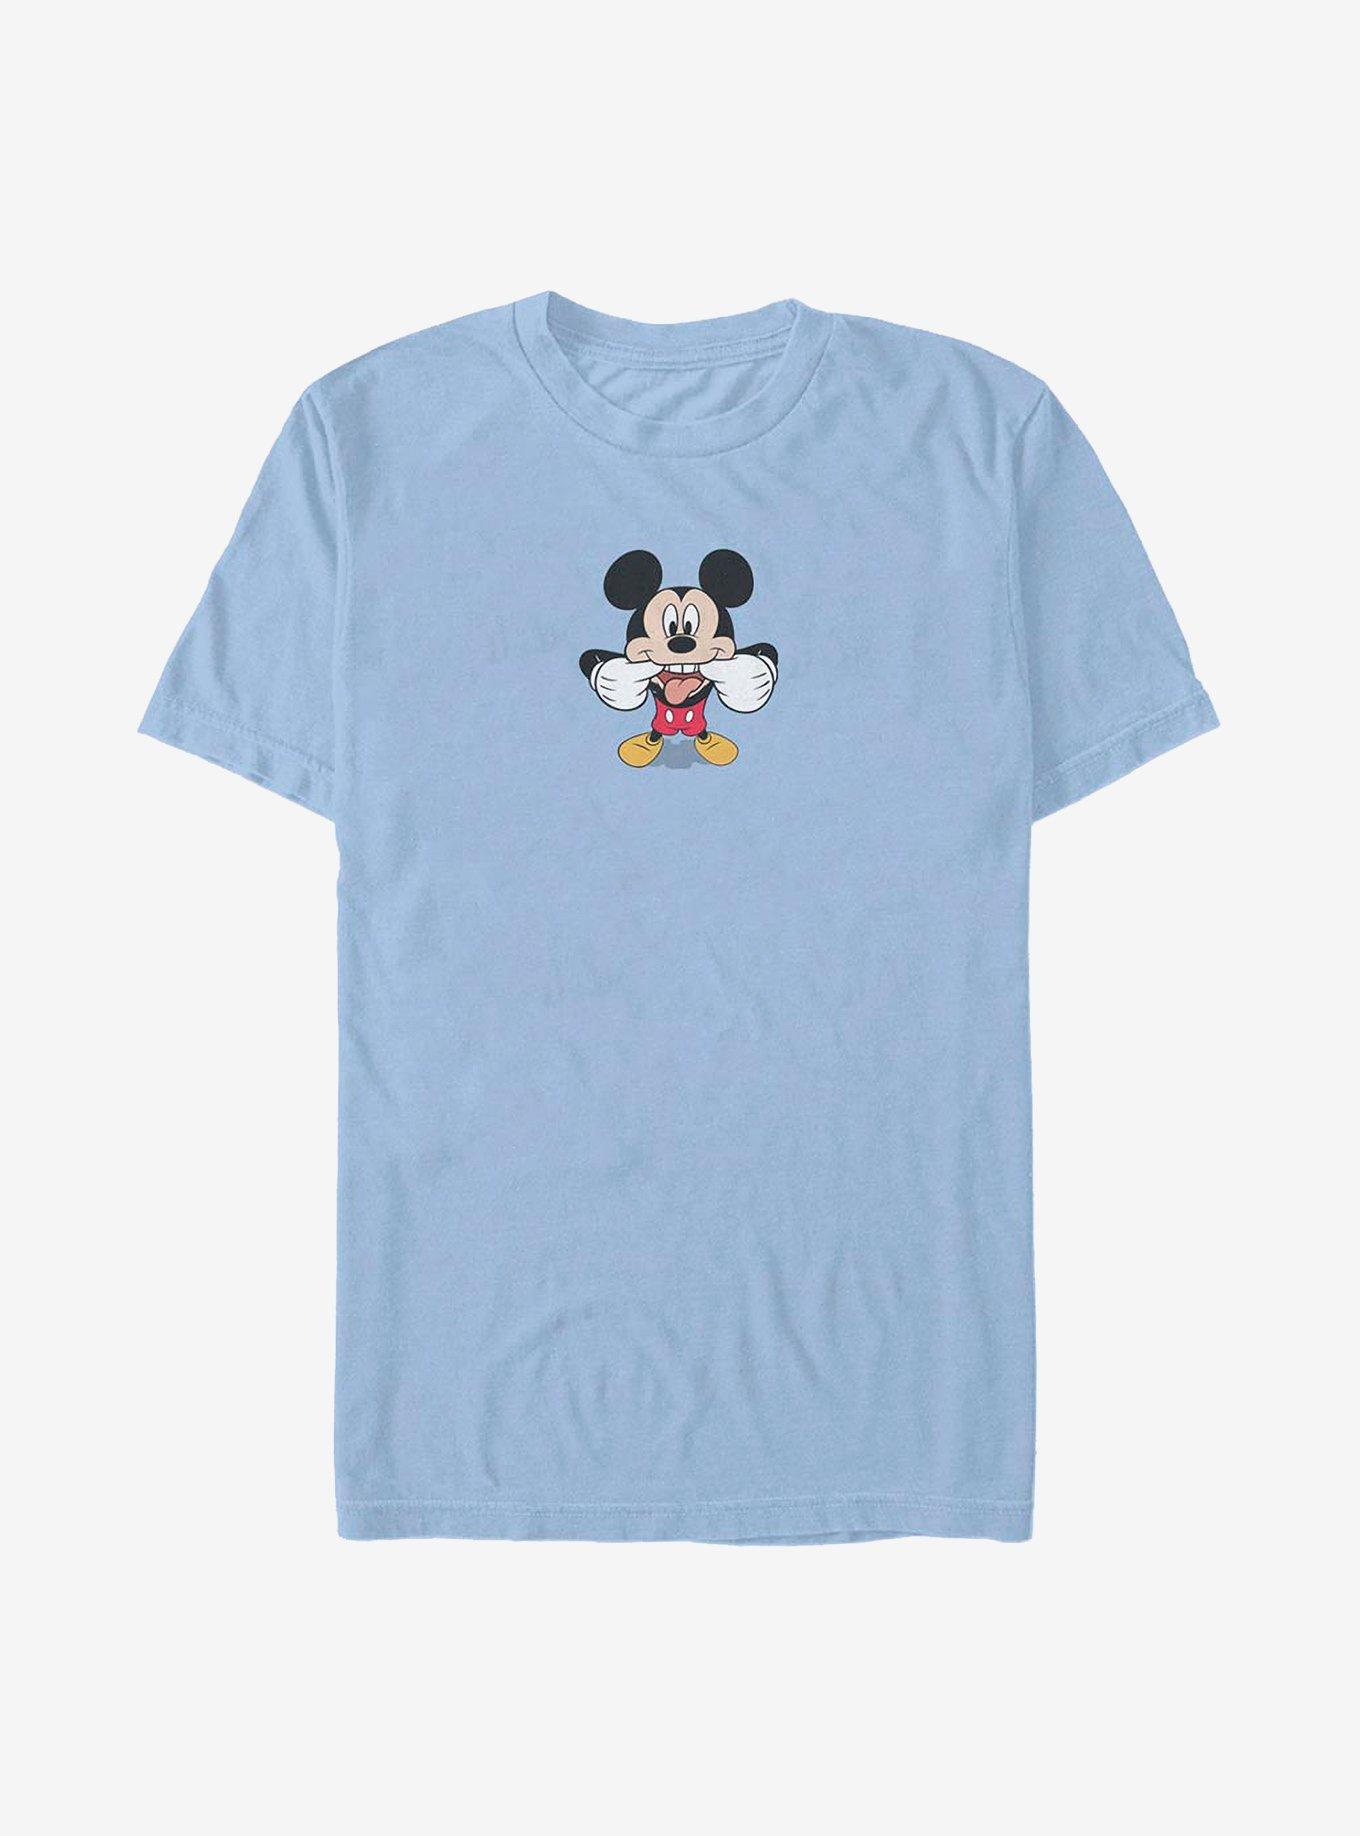 Disney Mickey Mouse In Your Face T-Shirt, LT BLUE, hi-res